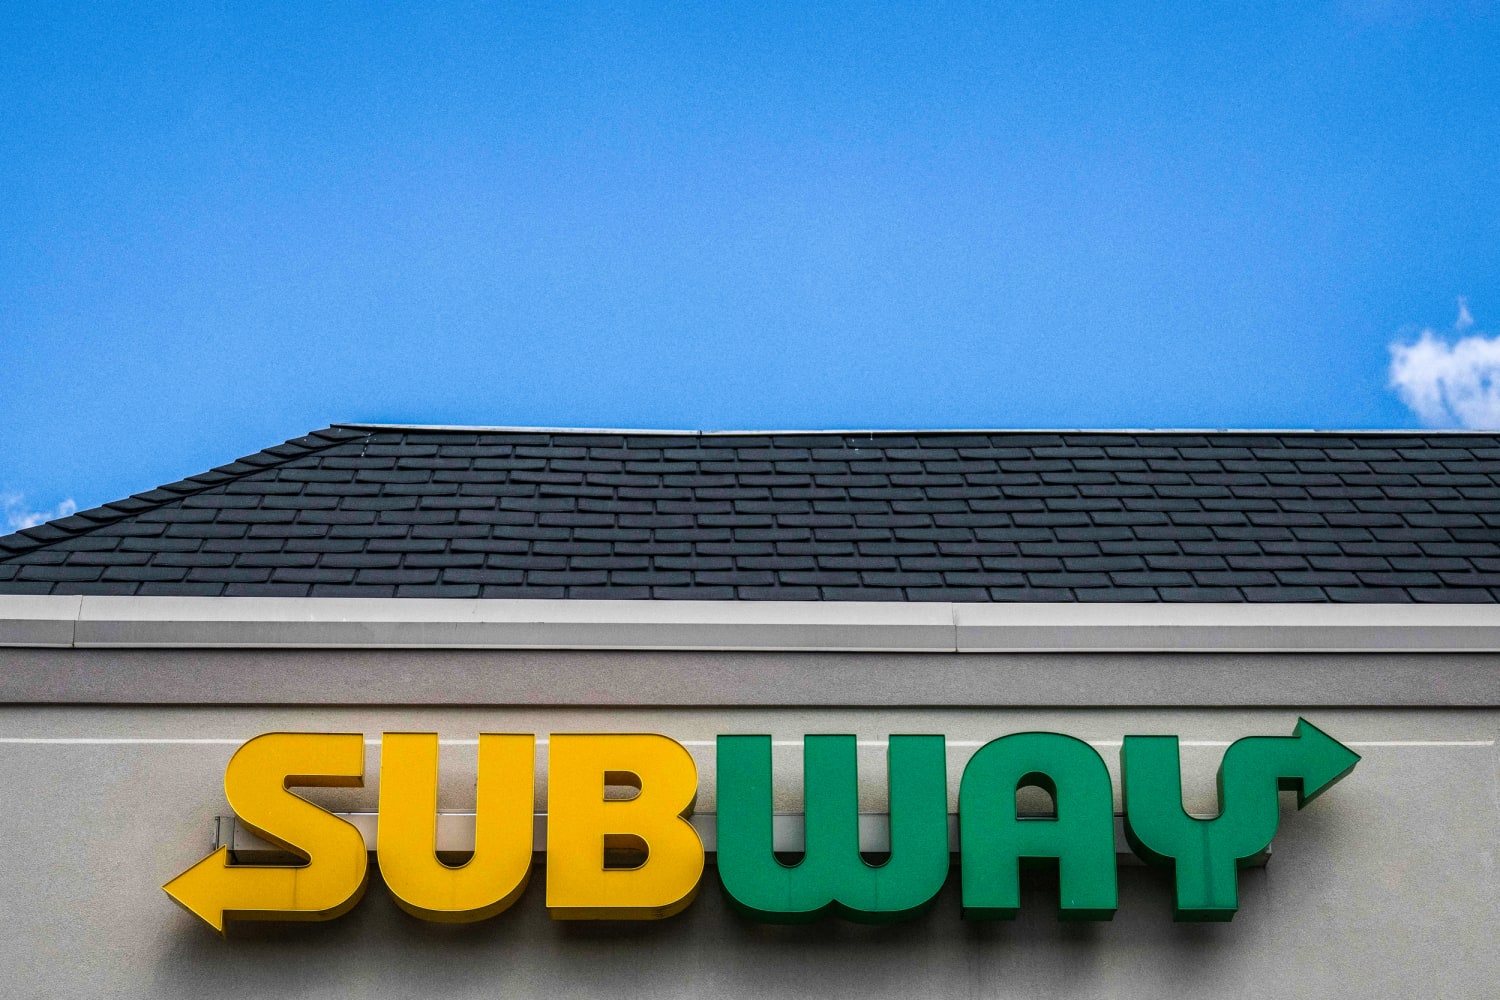 Elizabeth Warren is right about the FTC's Subway investigation